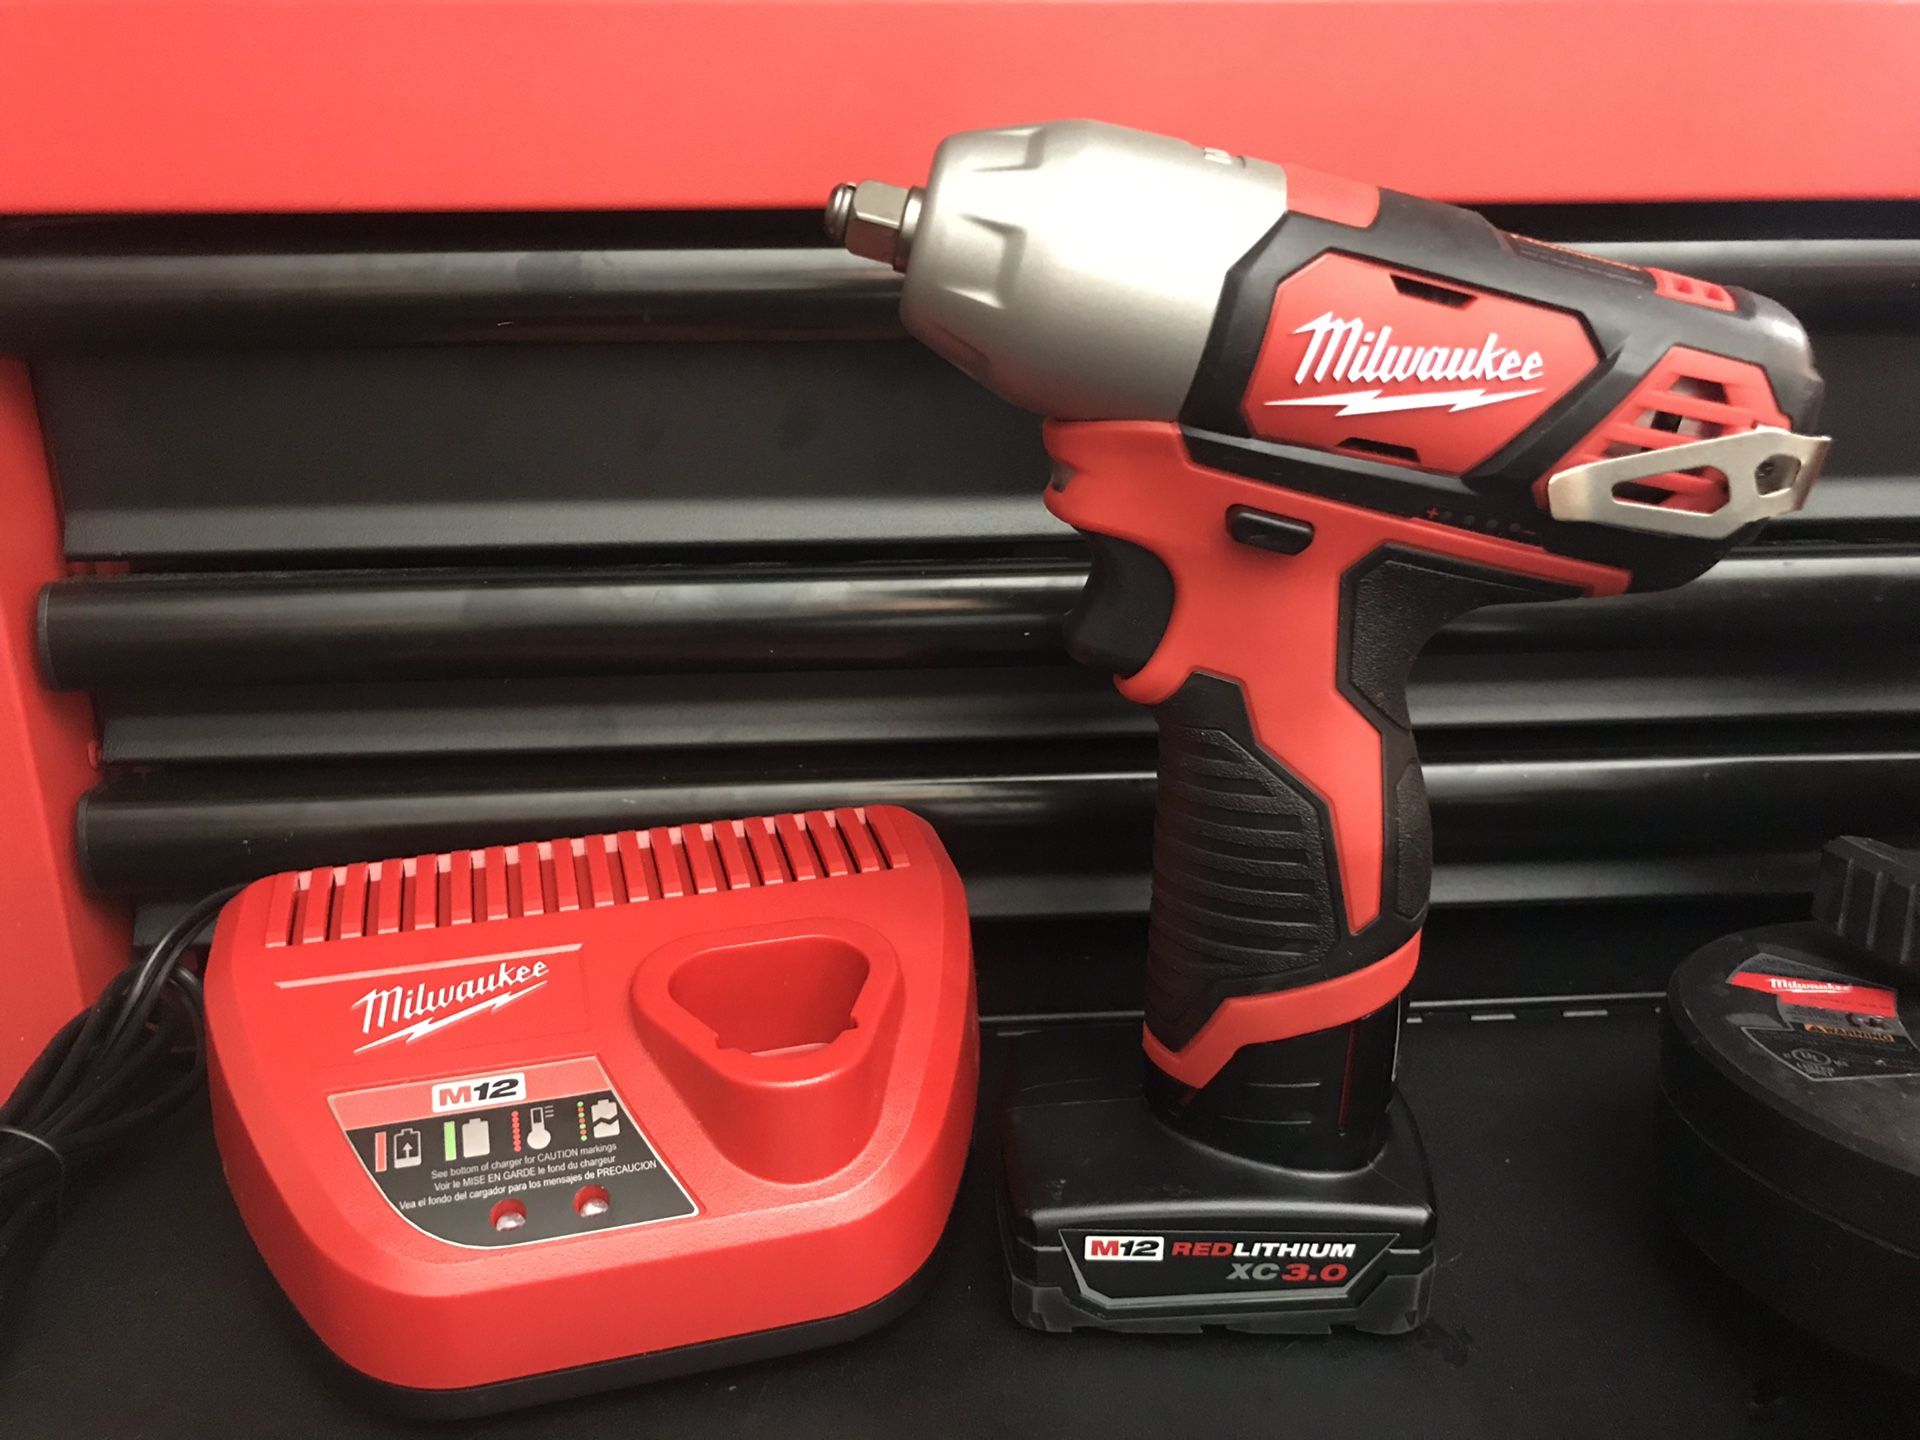 MILWAUKEE M12 3/8 IMPACT WRENCH KIT W 3.0 BATTERY AND CHARGER BRAND NEW